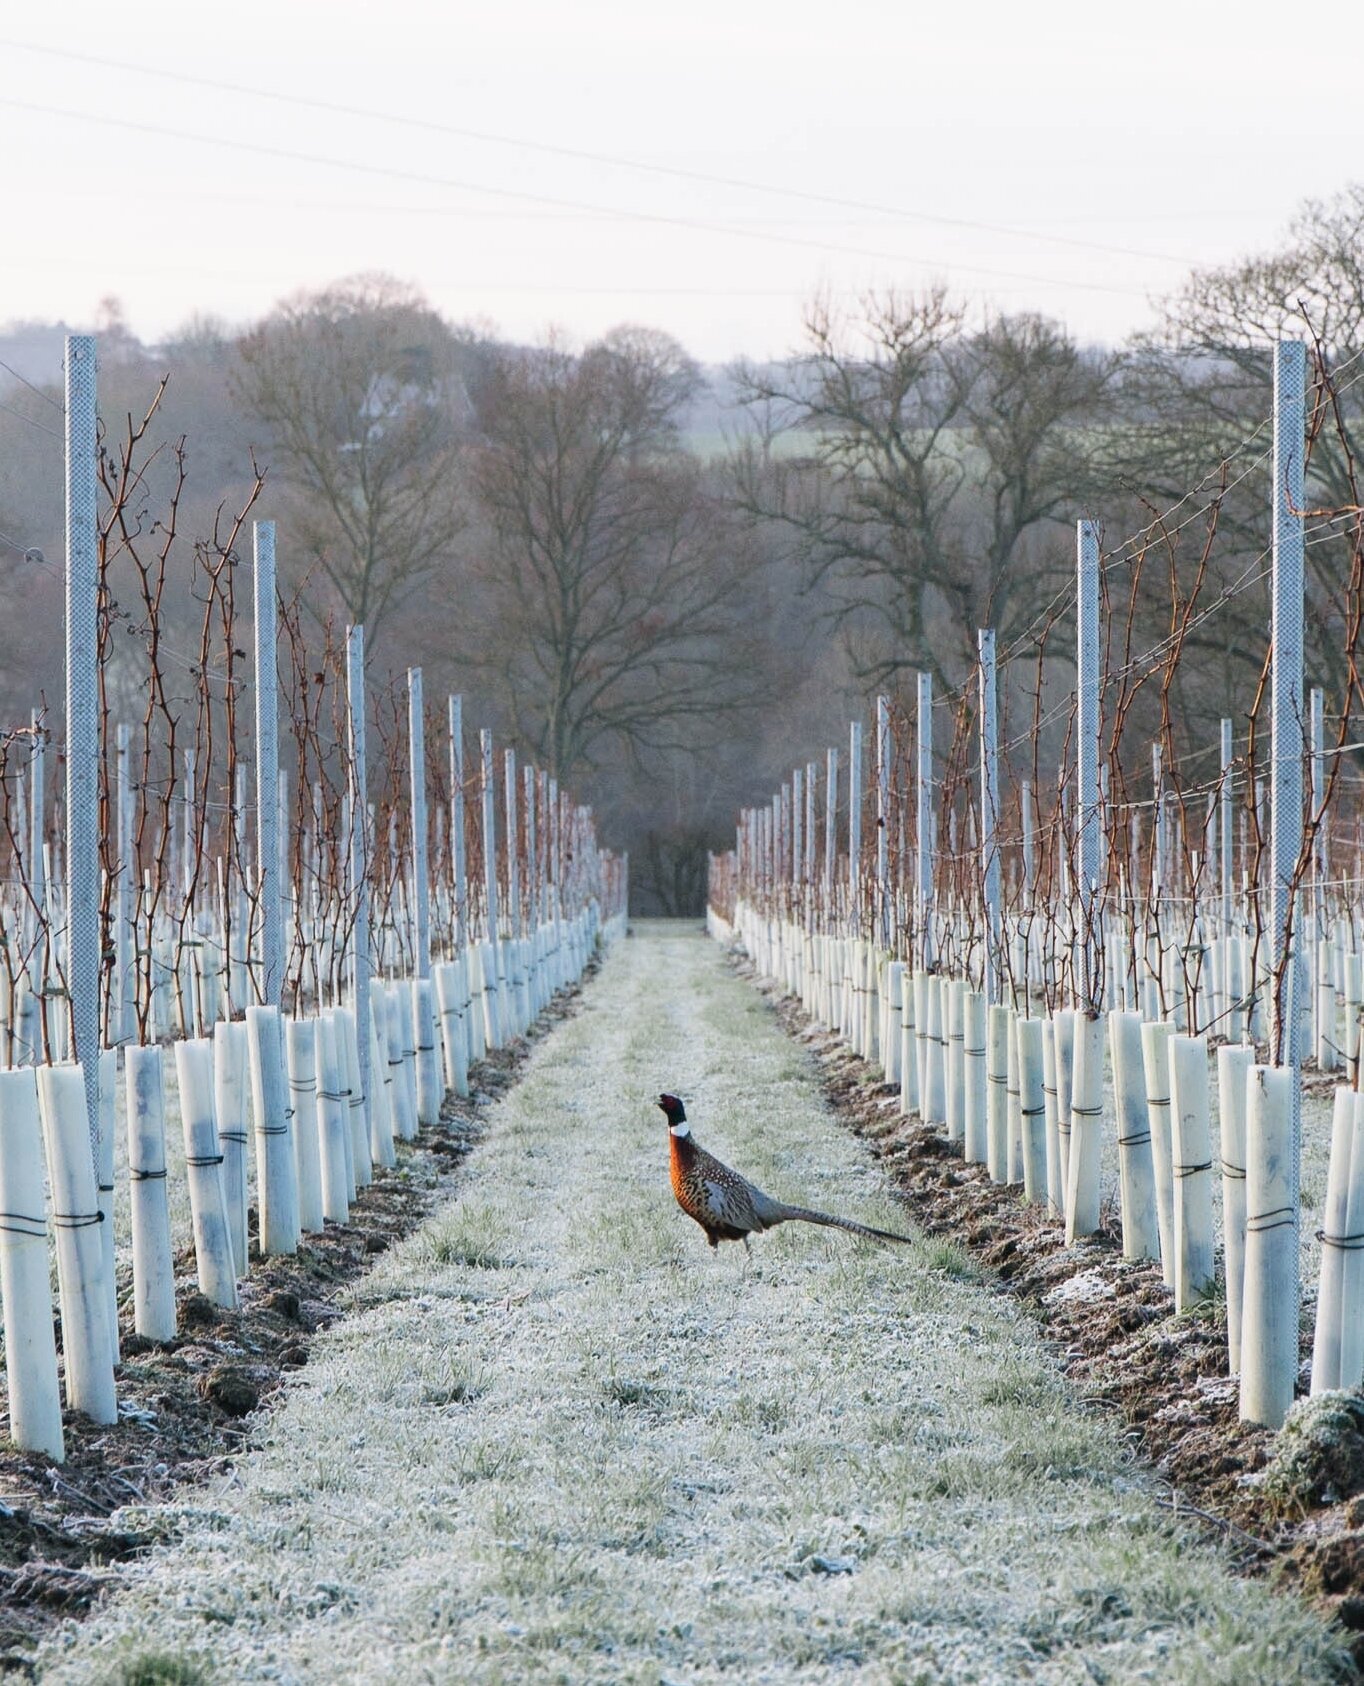 We're in for another cold snap this week here in West Sussex 🥶 The thermals are back out and our favourite winter soups are on heavy rotation! 🥘⁠
⁠
We're always in awe of nature's hardiness during the depths of winter. Our precious grapevines are n